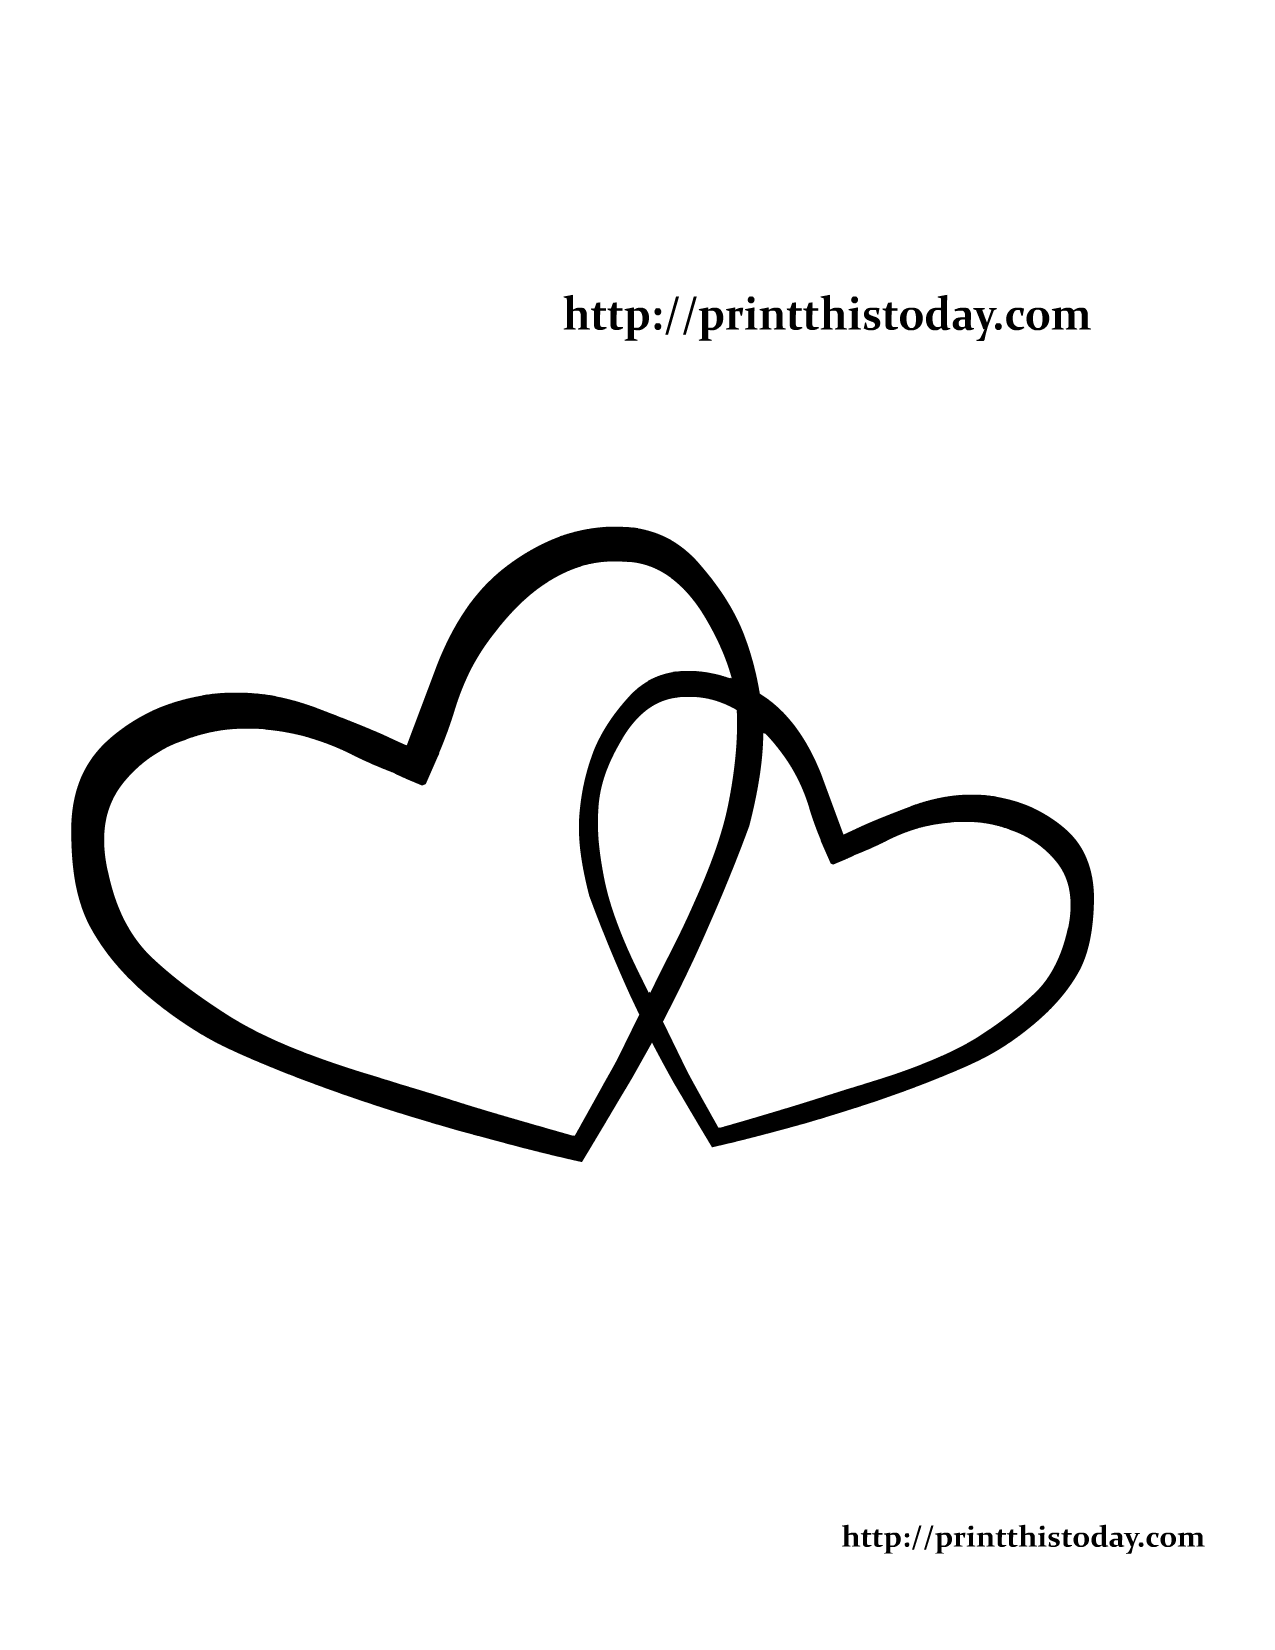 free wedding clipart two hearts - photo #30